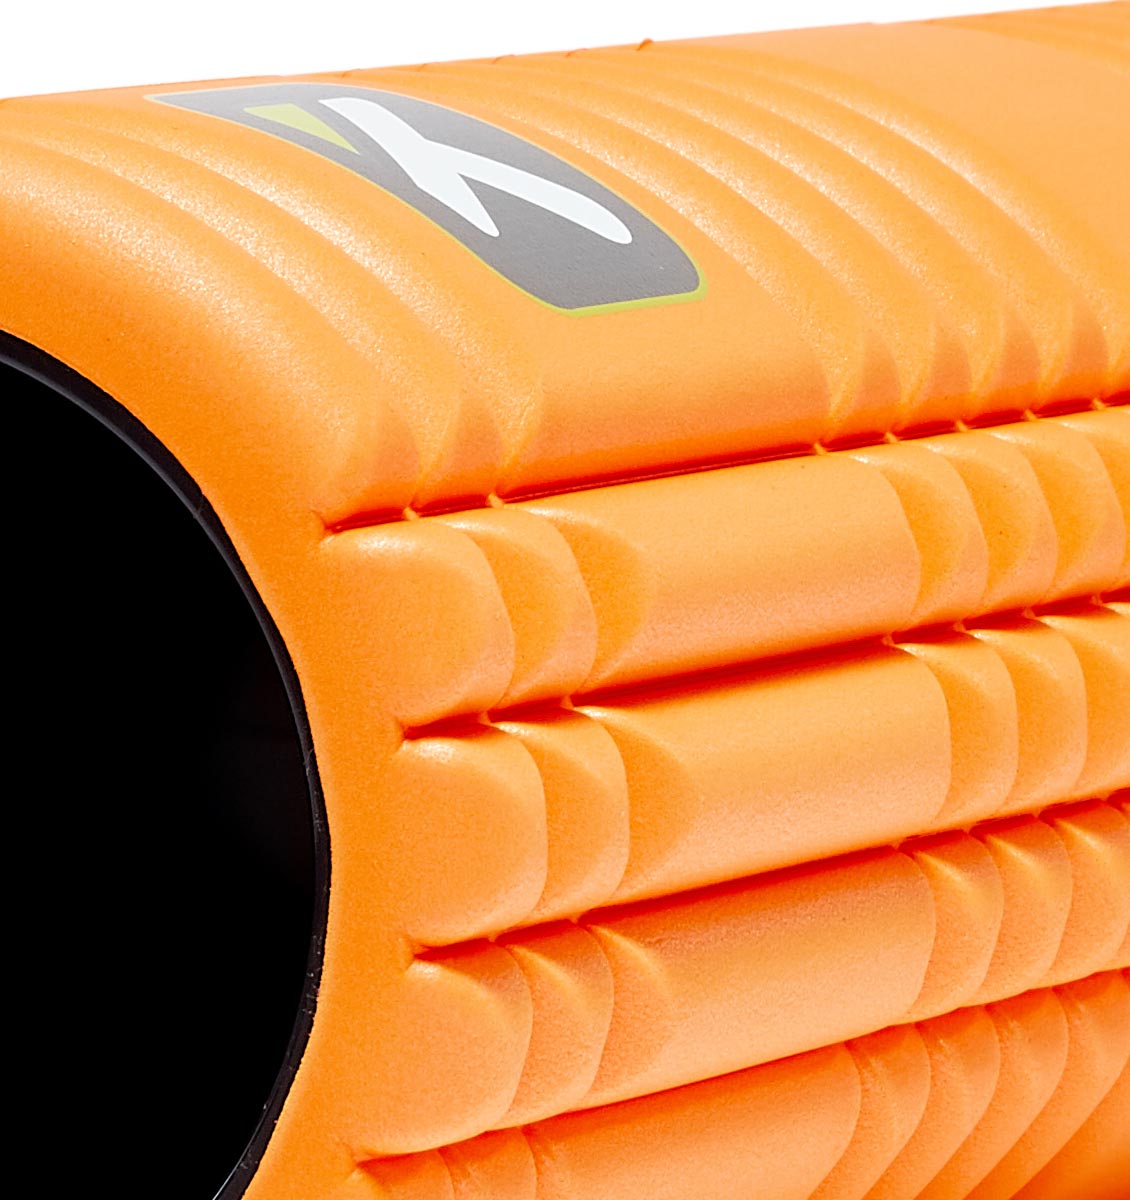 TPT3GRD2OWS0000 TriggerPoint The Grid 2.0 Foam Roller Orange - 45 Degree Angle - Close Up